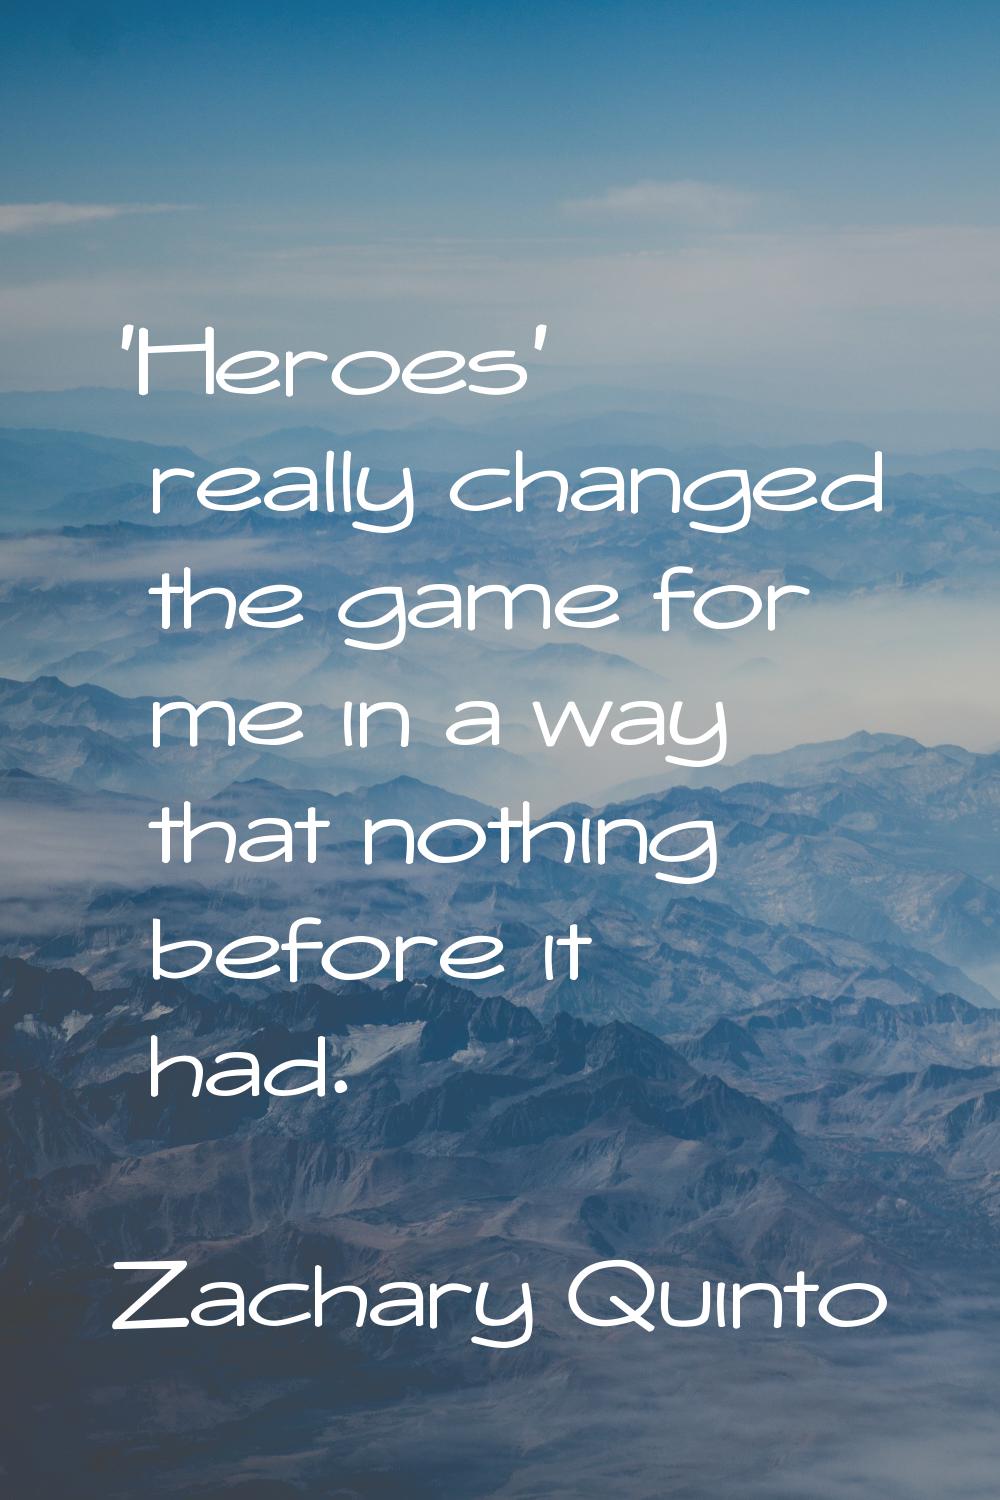 'Heroes' really changed the game for me in a way that nothing before it had.